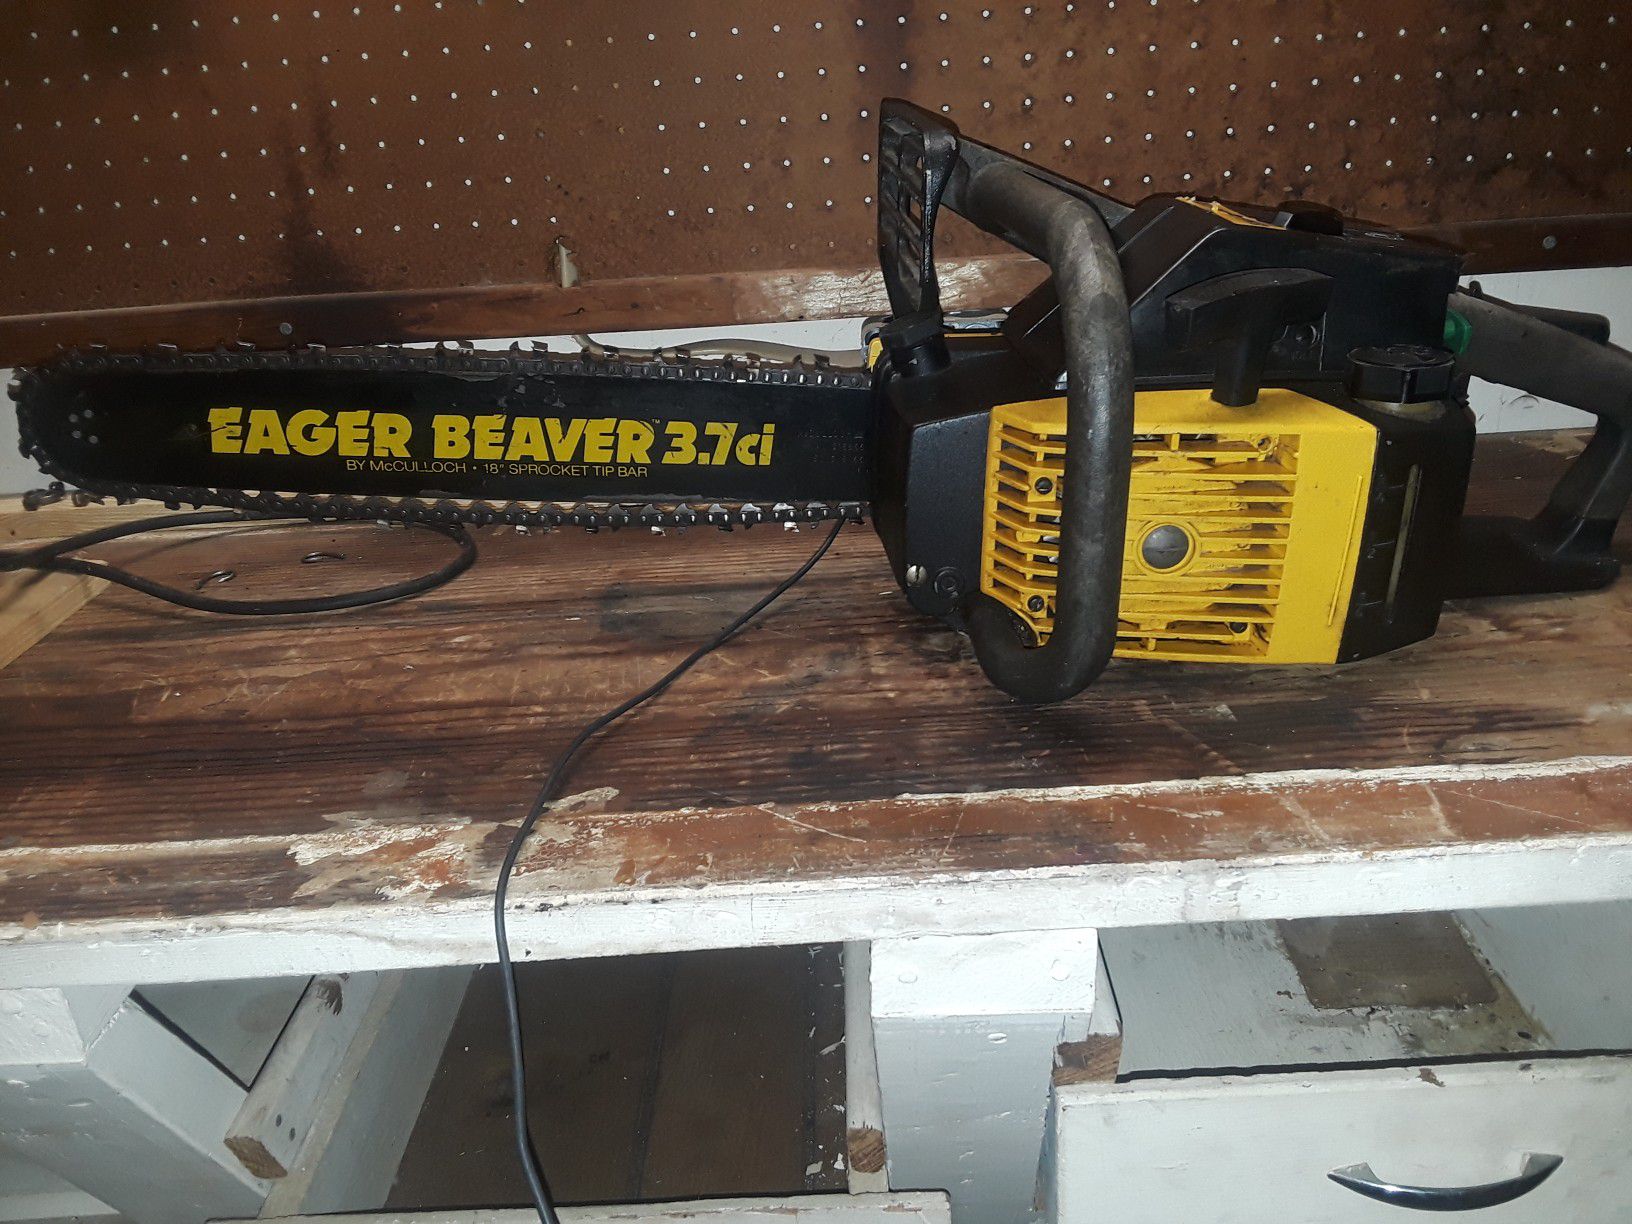 McCulloch 3.7 Eager Beaver Chainsaw (610) for Sale in Tyler, TX - OfferUp